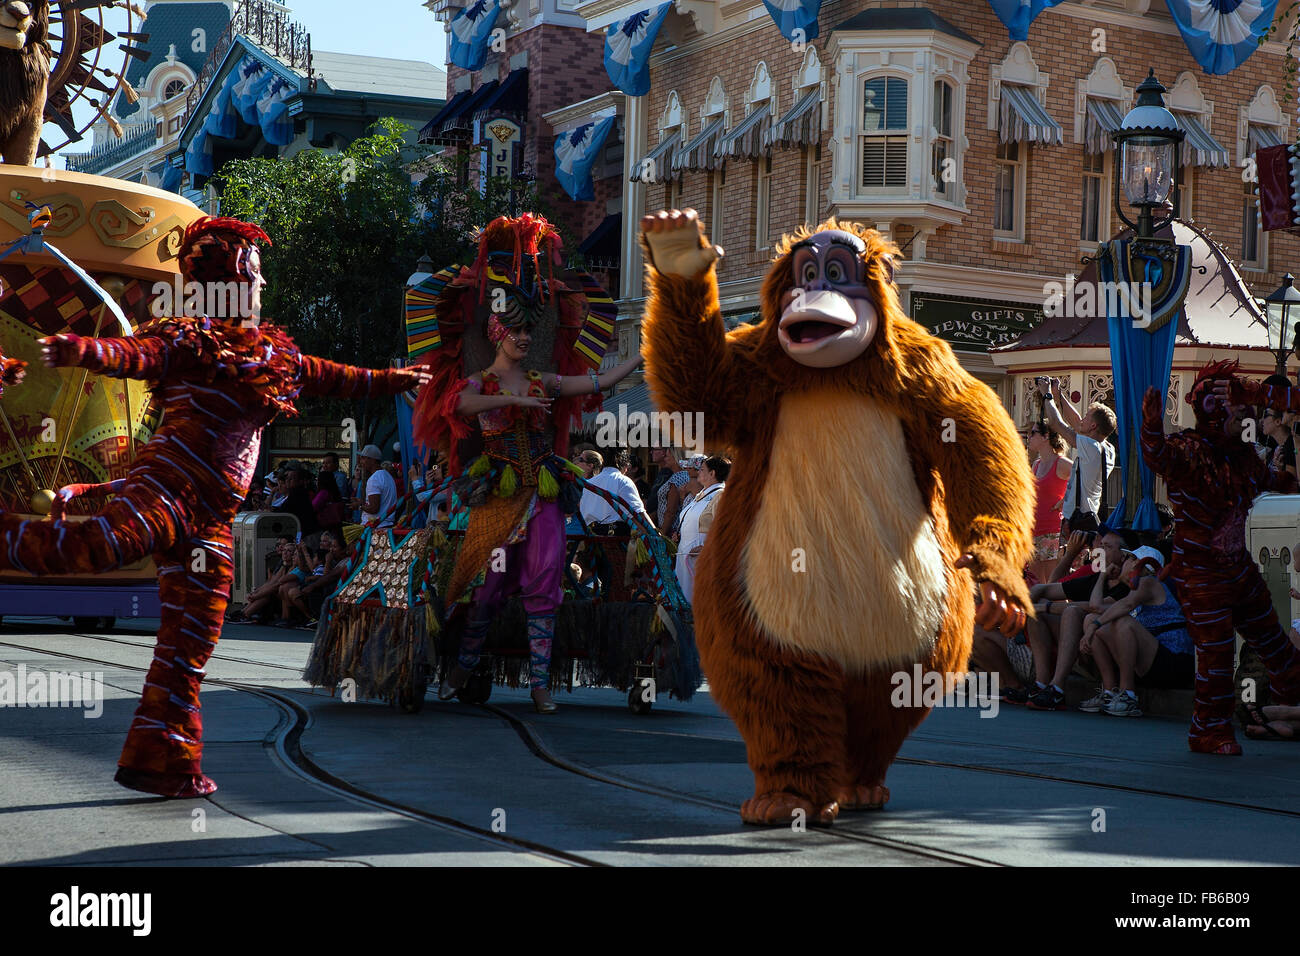 Characters participate in a parade on Main Street, Disneyland Resort, Anaheim, California, United States of America Stock Photo